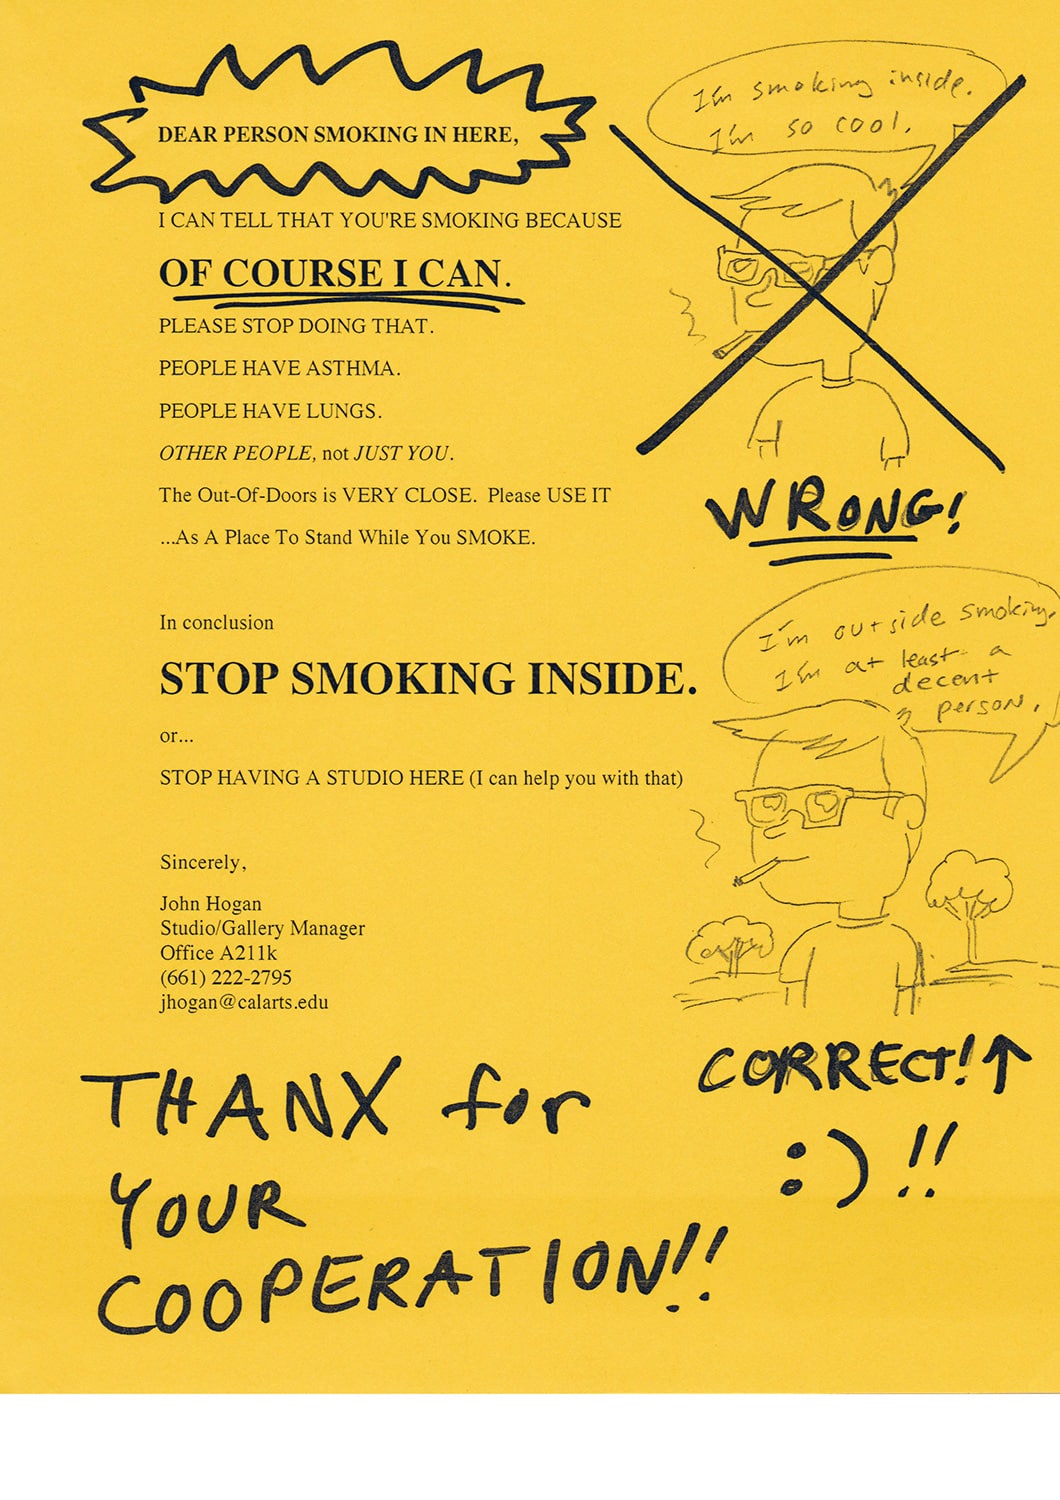 Notice with top text: 'Dear person smoking in here, I can tell that you're smoking because OF COURSE I CAN.' Also sketches of indoor smoker (crossed out) and outdoor smoker (approved).